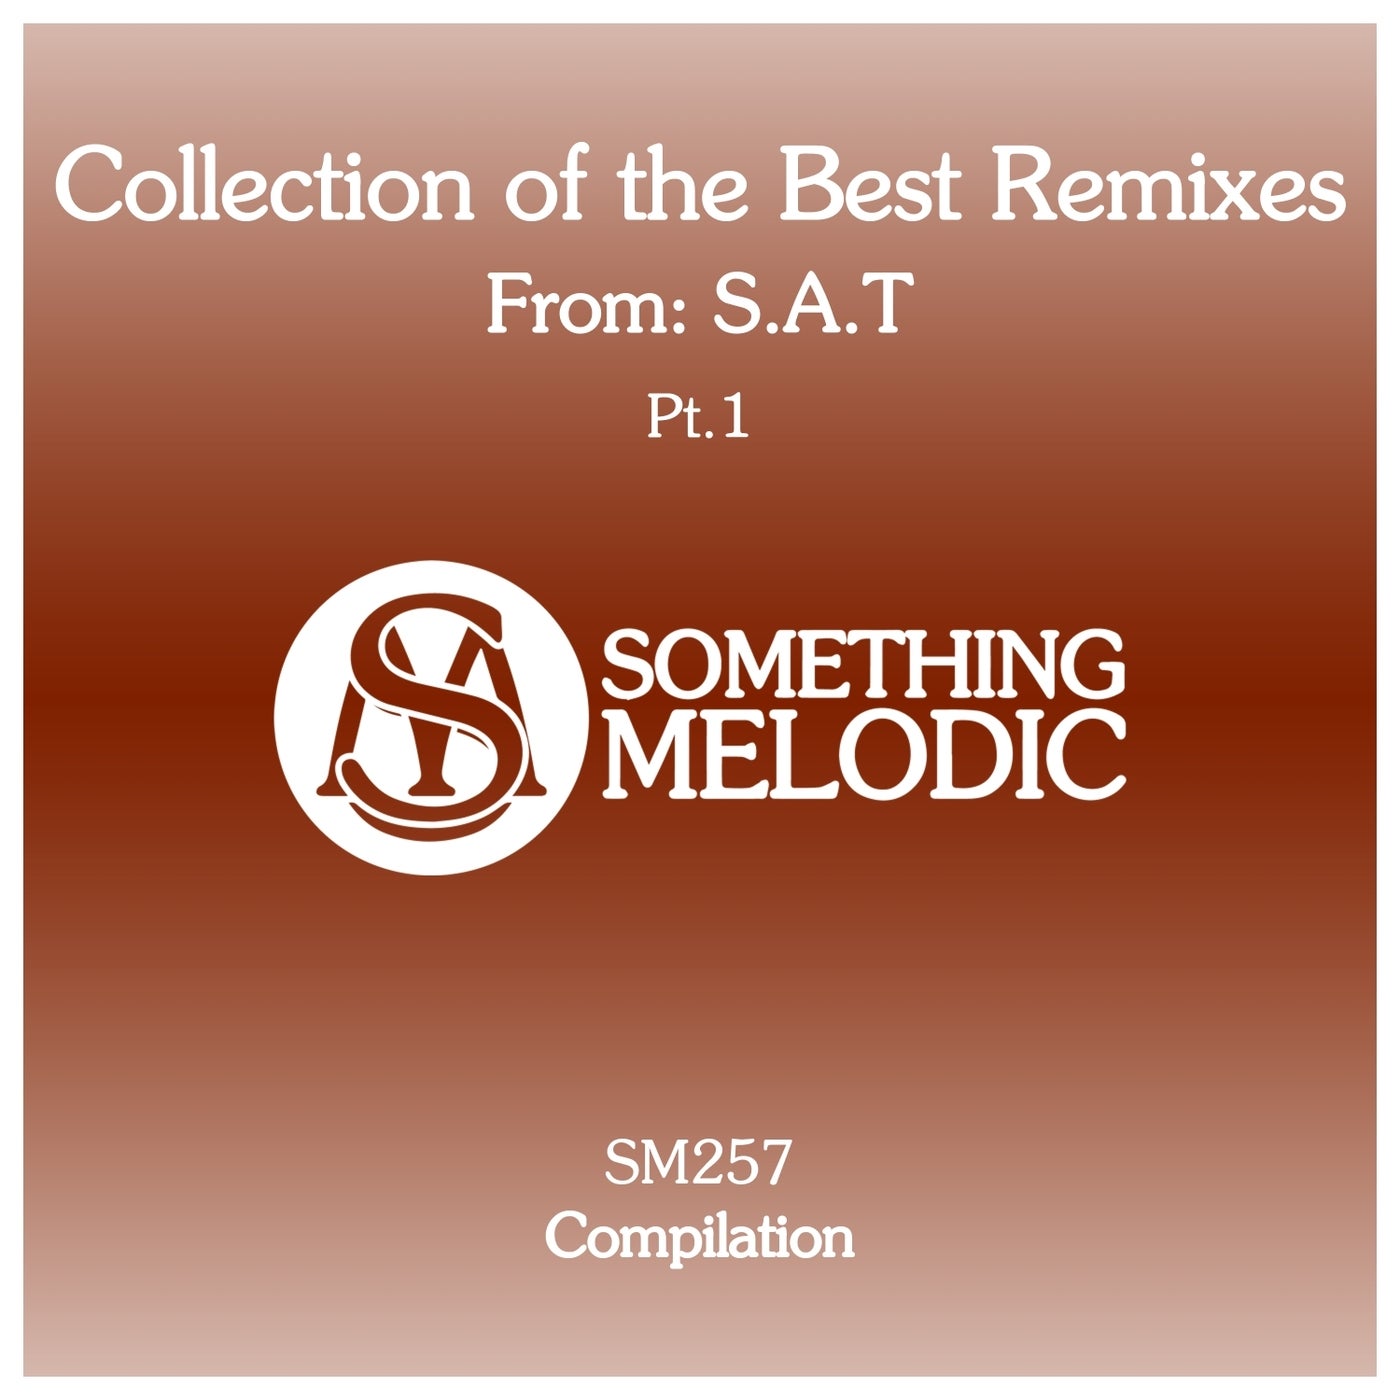 Collection of the Best Remixes From: S.A.T, Pt. 1